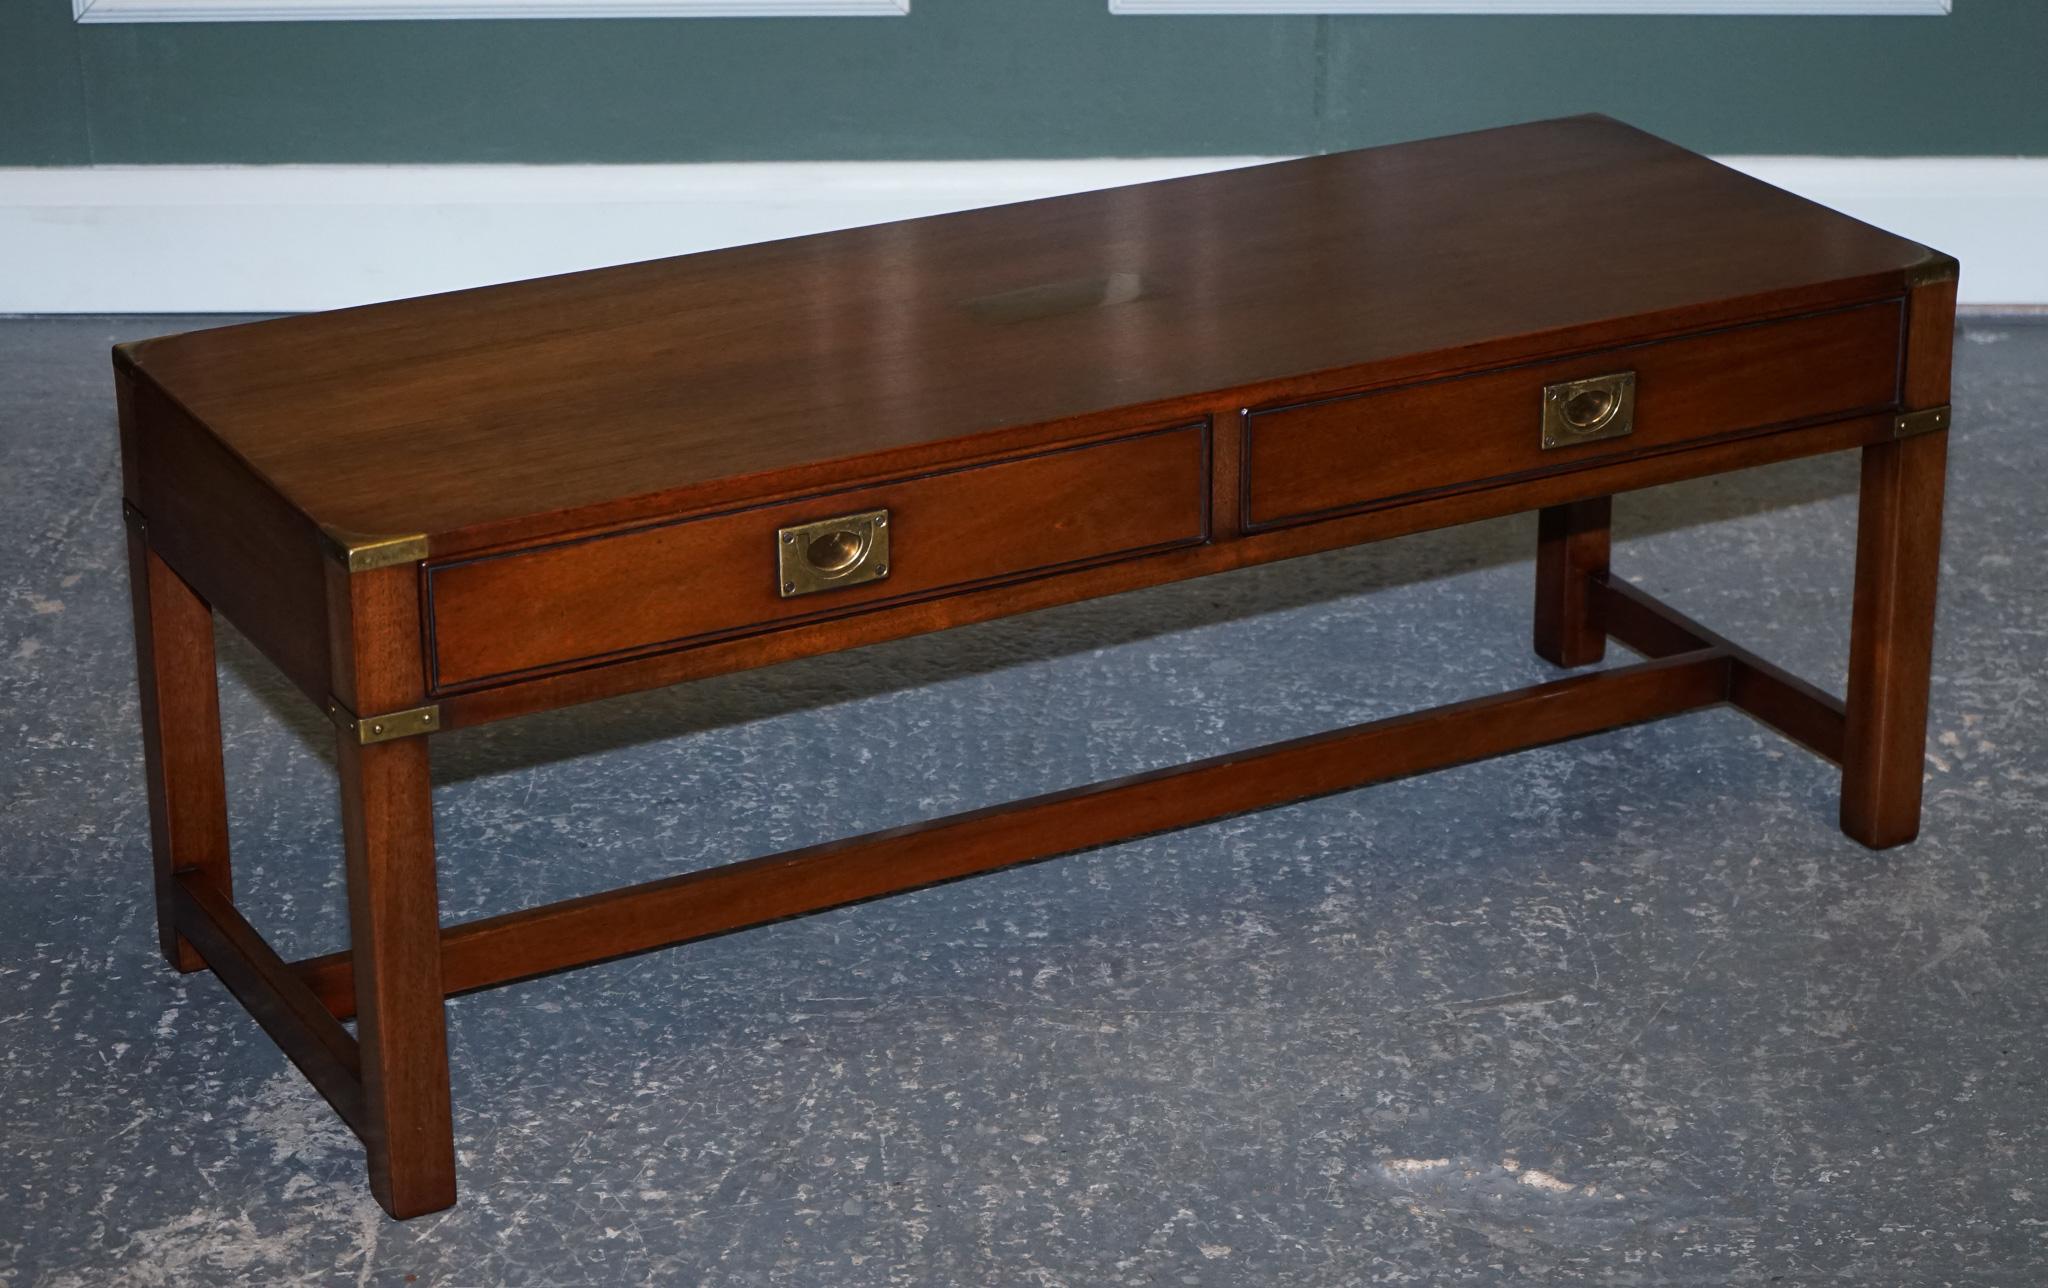 We are delighted to offer for sale this Kennedy For harrods coffee table.

This piece was sold through Harrods, and It was made by Kennedy, who was Harrod's oldest concession. They retailed with them for 87 years. The piece has lovely brass trims